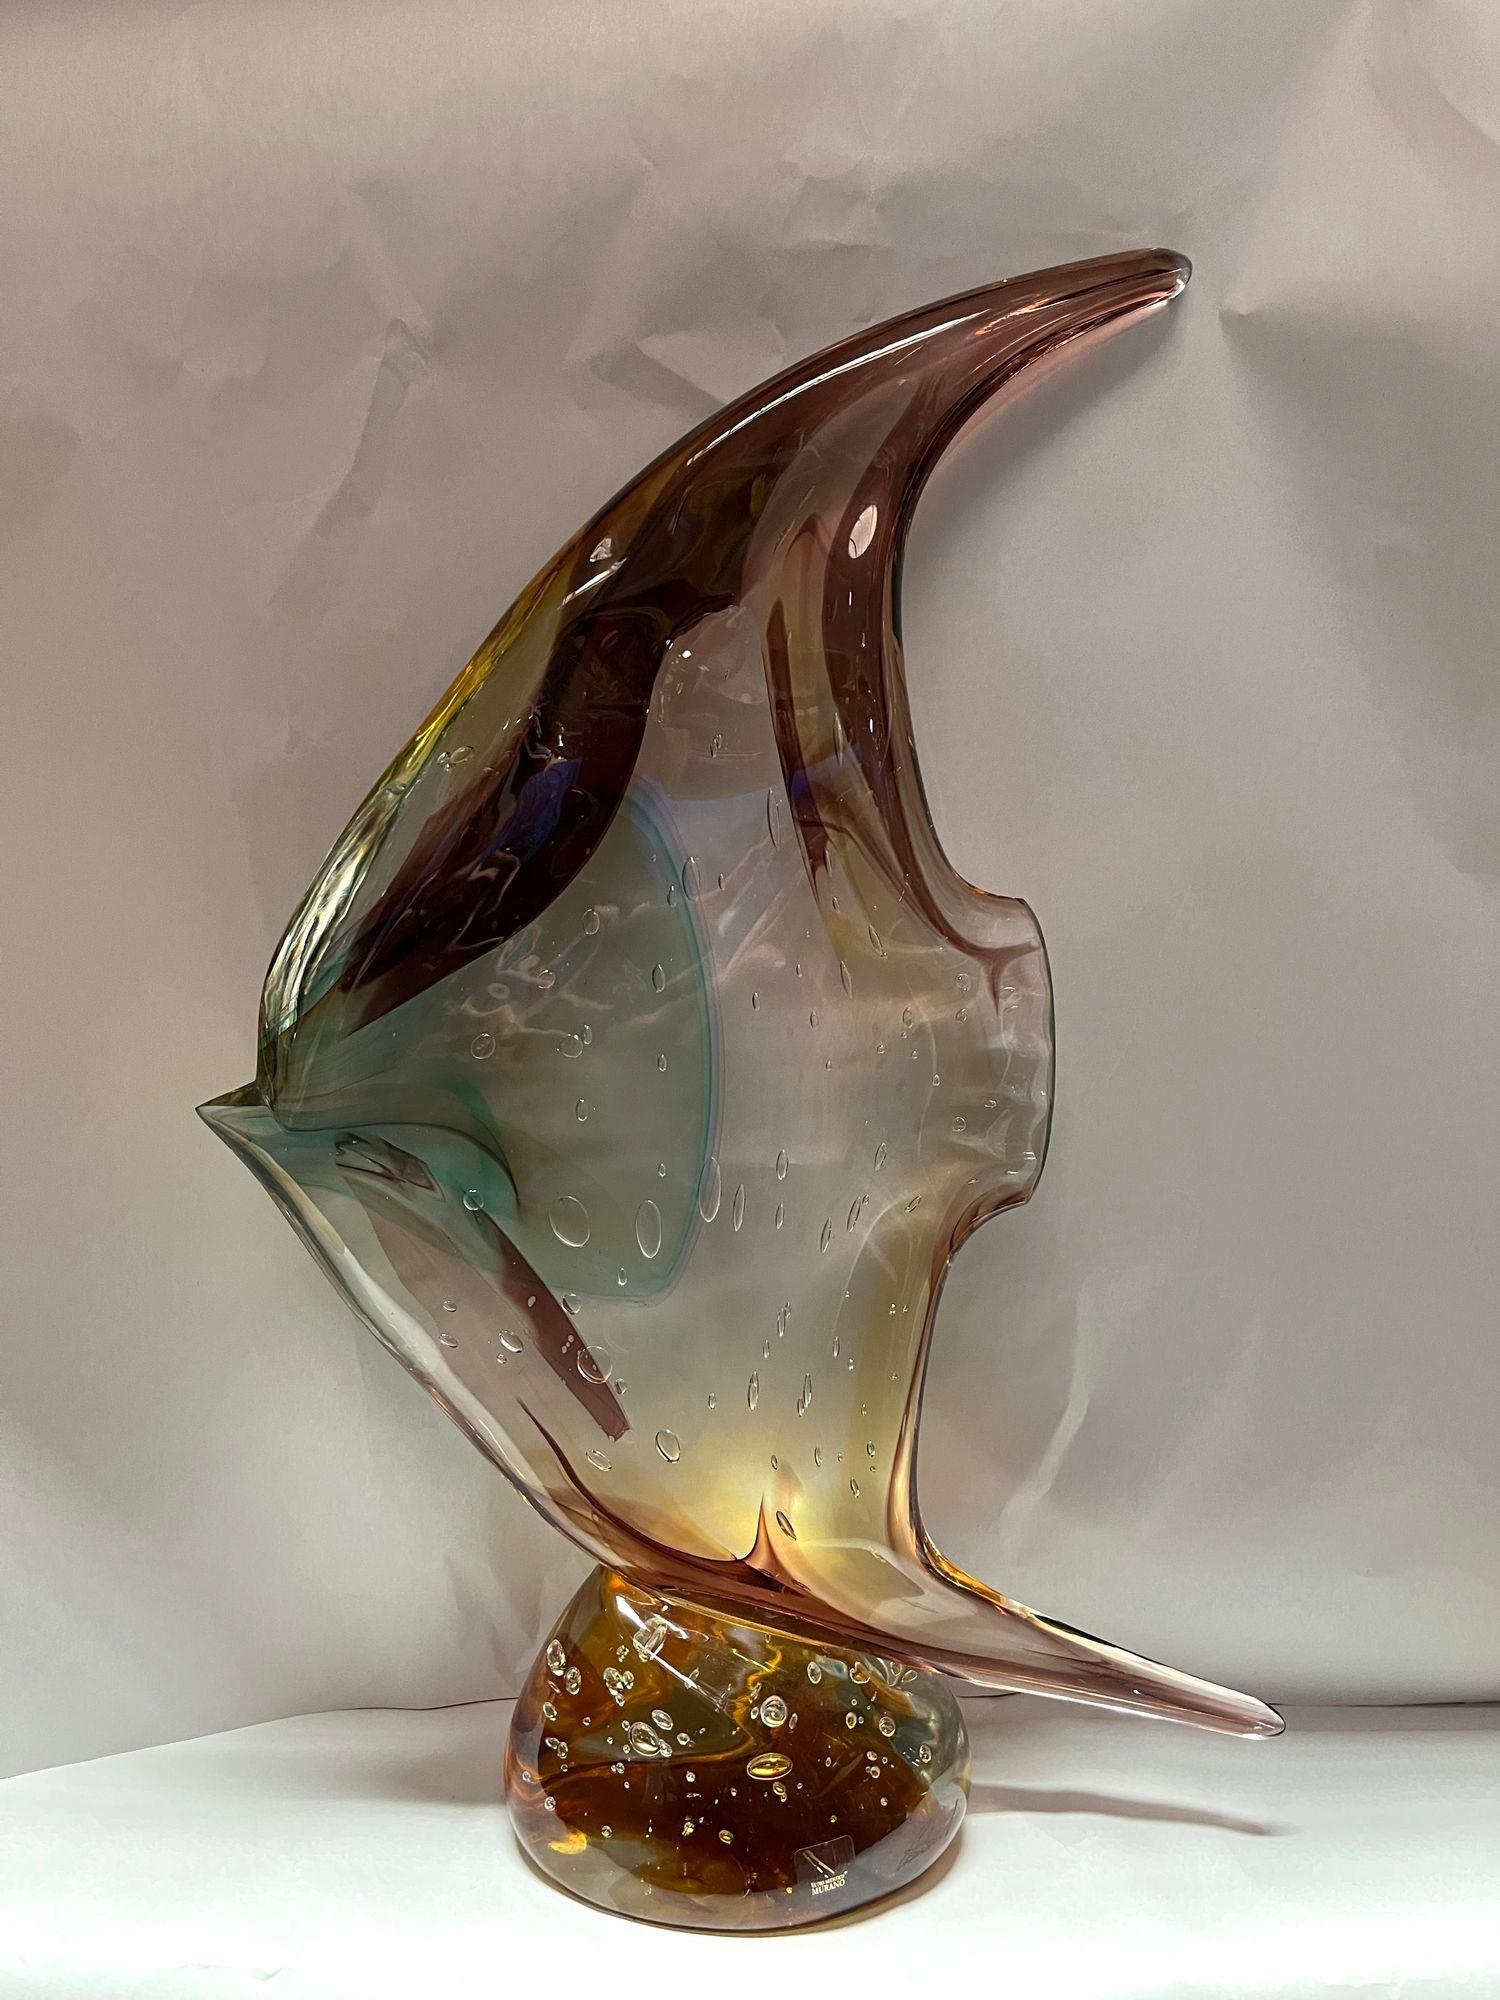 Murano glass fish sculpture by Sergio Costantini for Vetro Artistico Murano with brown, amber, yellow and blue tones. Made in Italy, 20th century (Includes sticker and signature)
Dimensions:
20